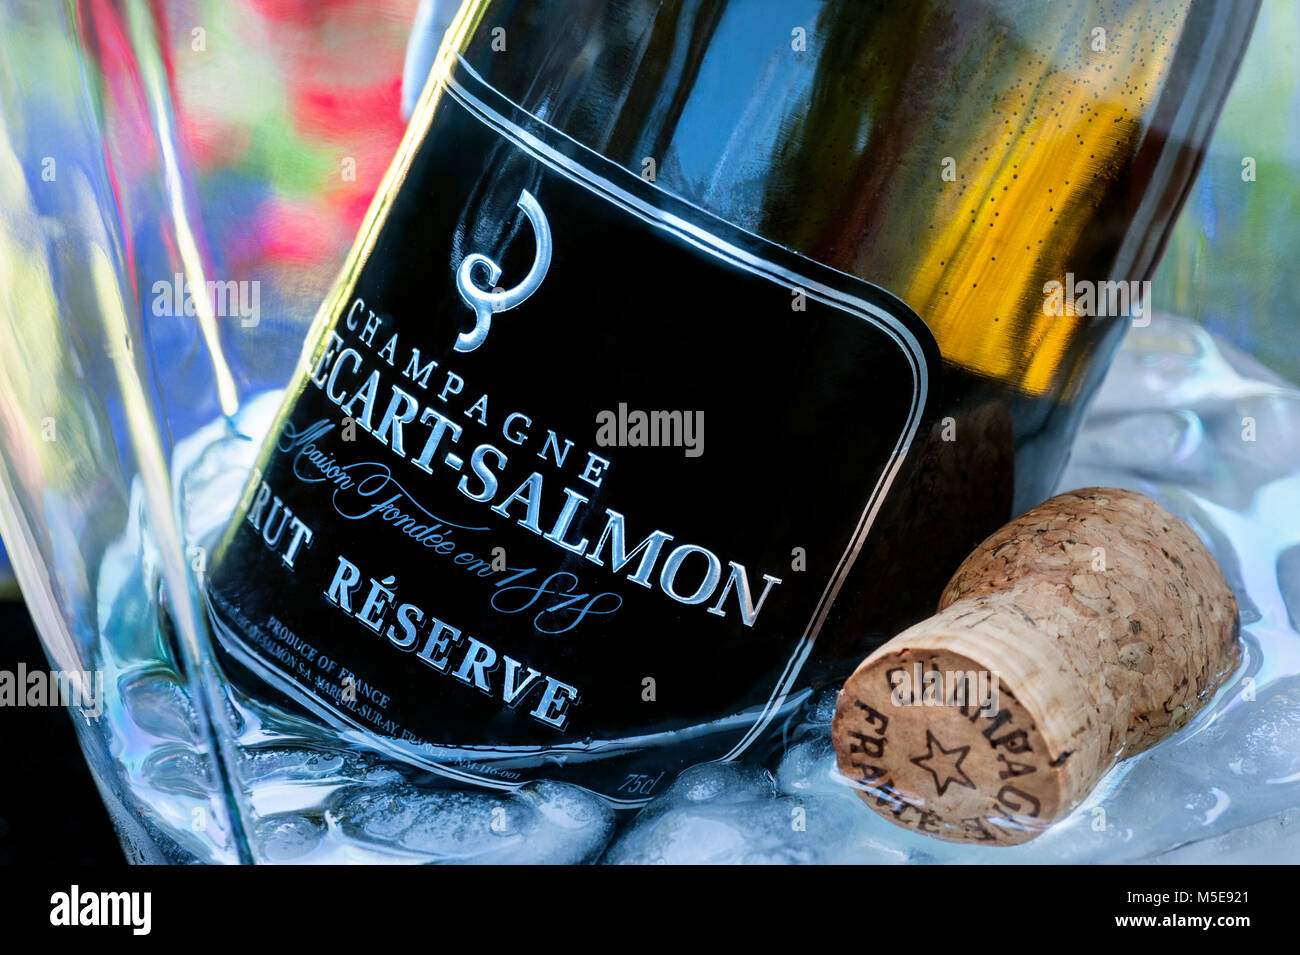 Billecart-Salmon Brut Champagne bottle label on ice chilling in luxury crystal glass wine cooler in alfresco garden situation Stock Photo